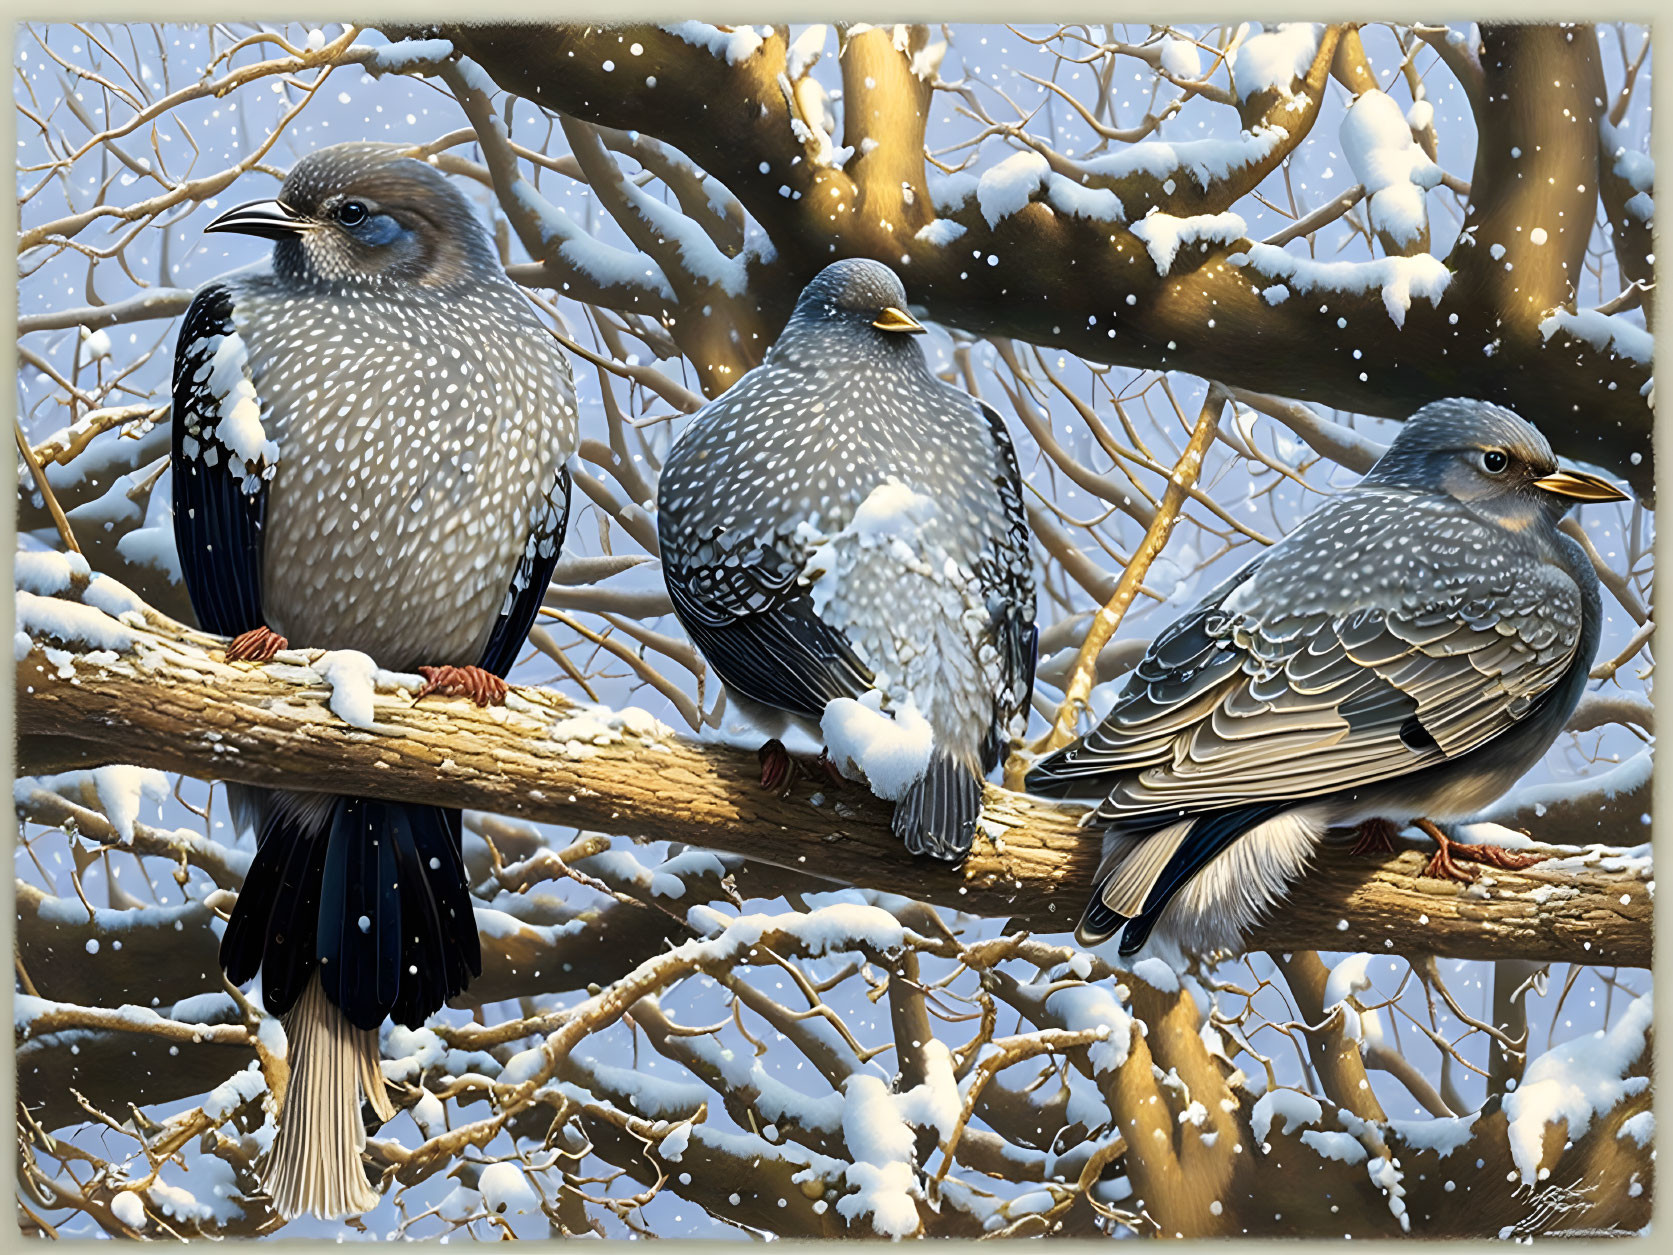 Three starlings on snow-covered branch with falling snowflakes and wintry trees